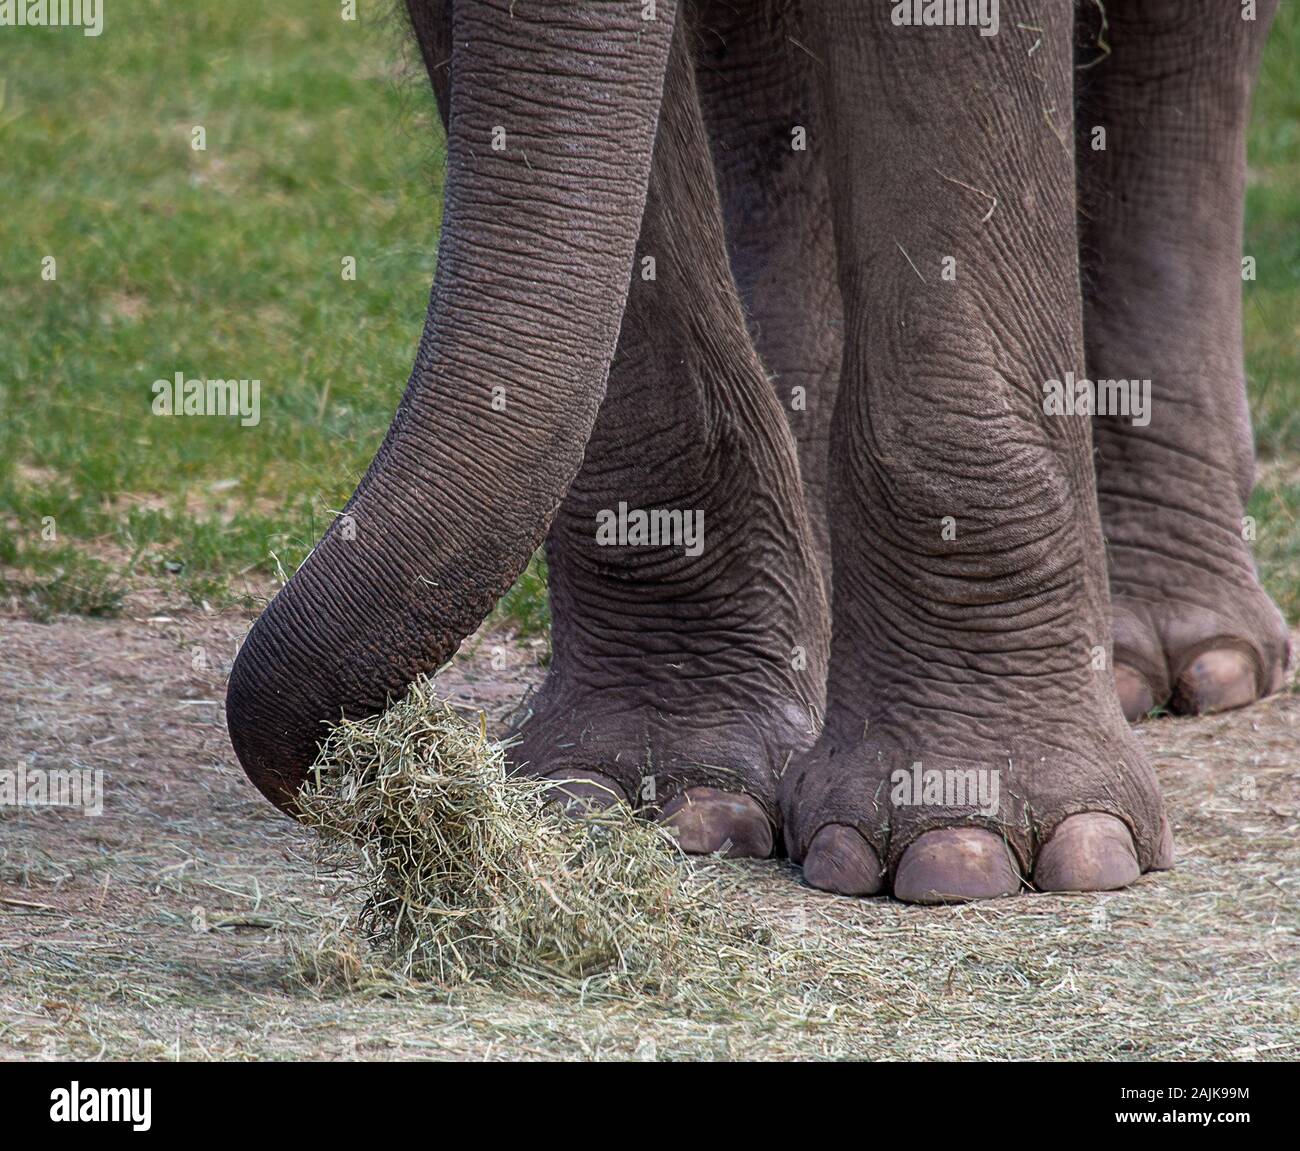 A close up of the legs and trunk of an elephant. The trunk is collecting hay off the floor Stock Photo